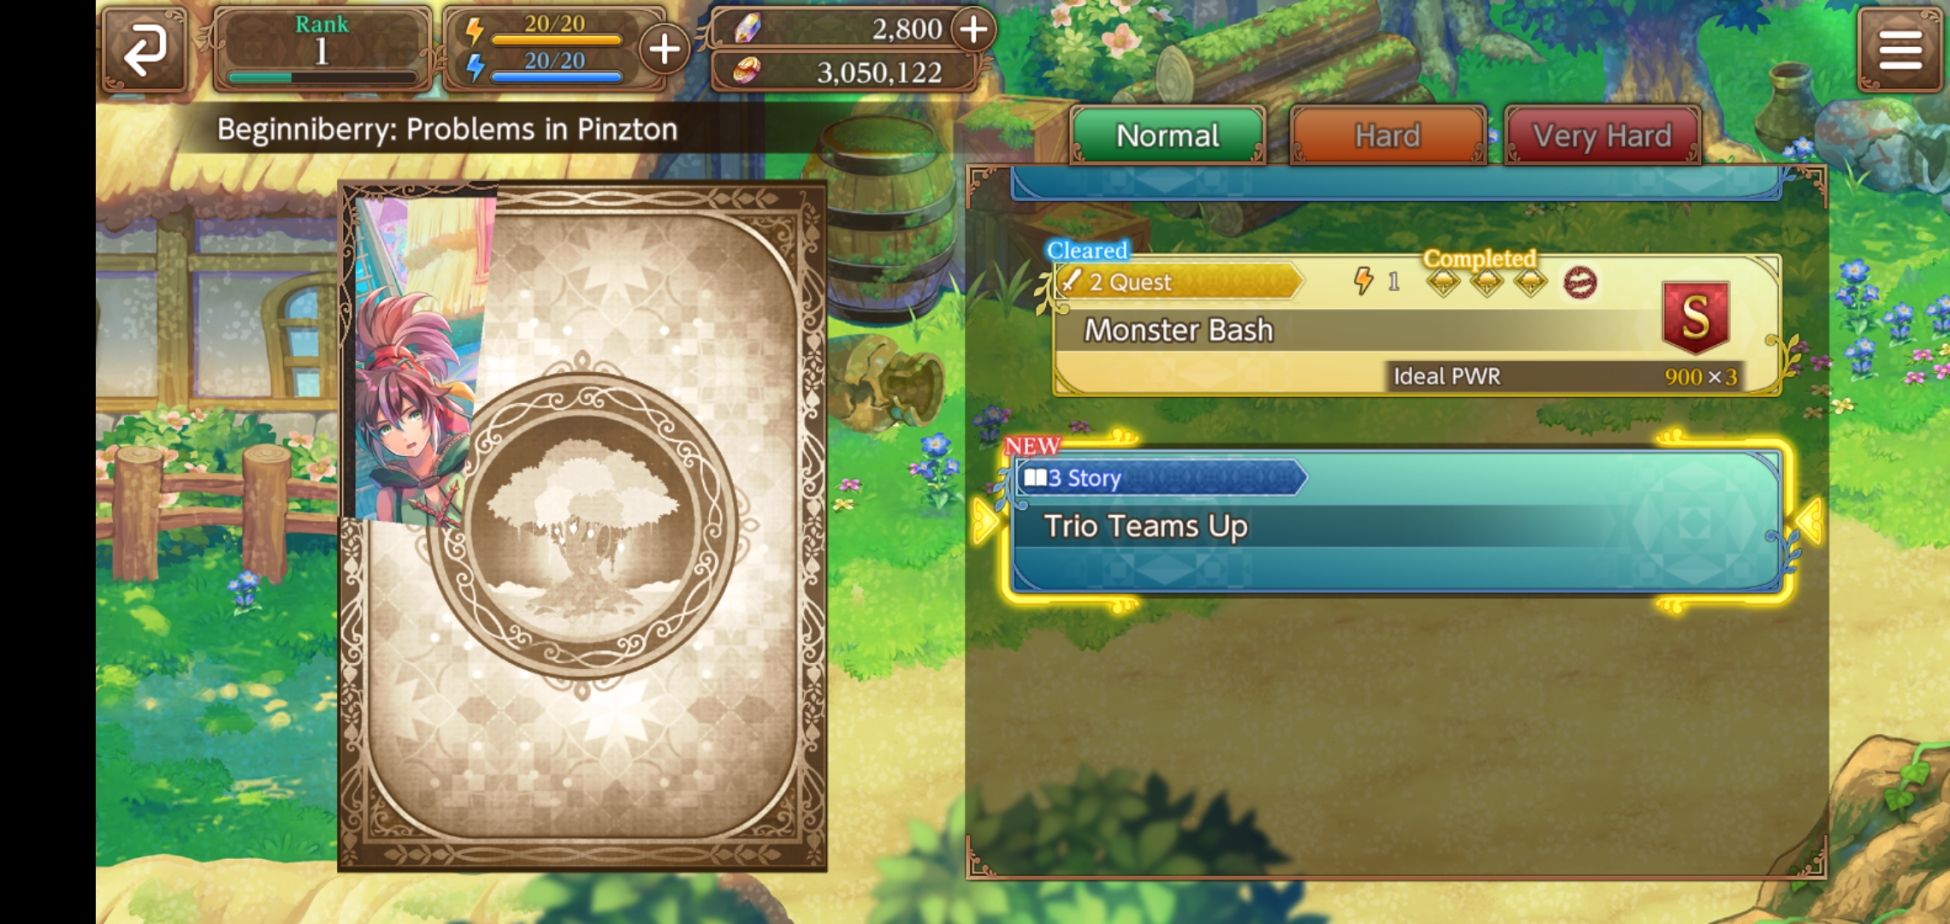 Quest menu preview in Echoes of Mana